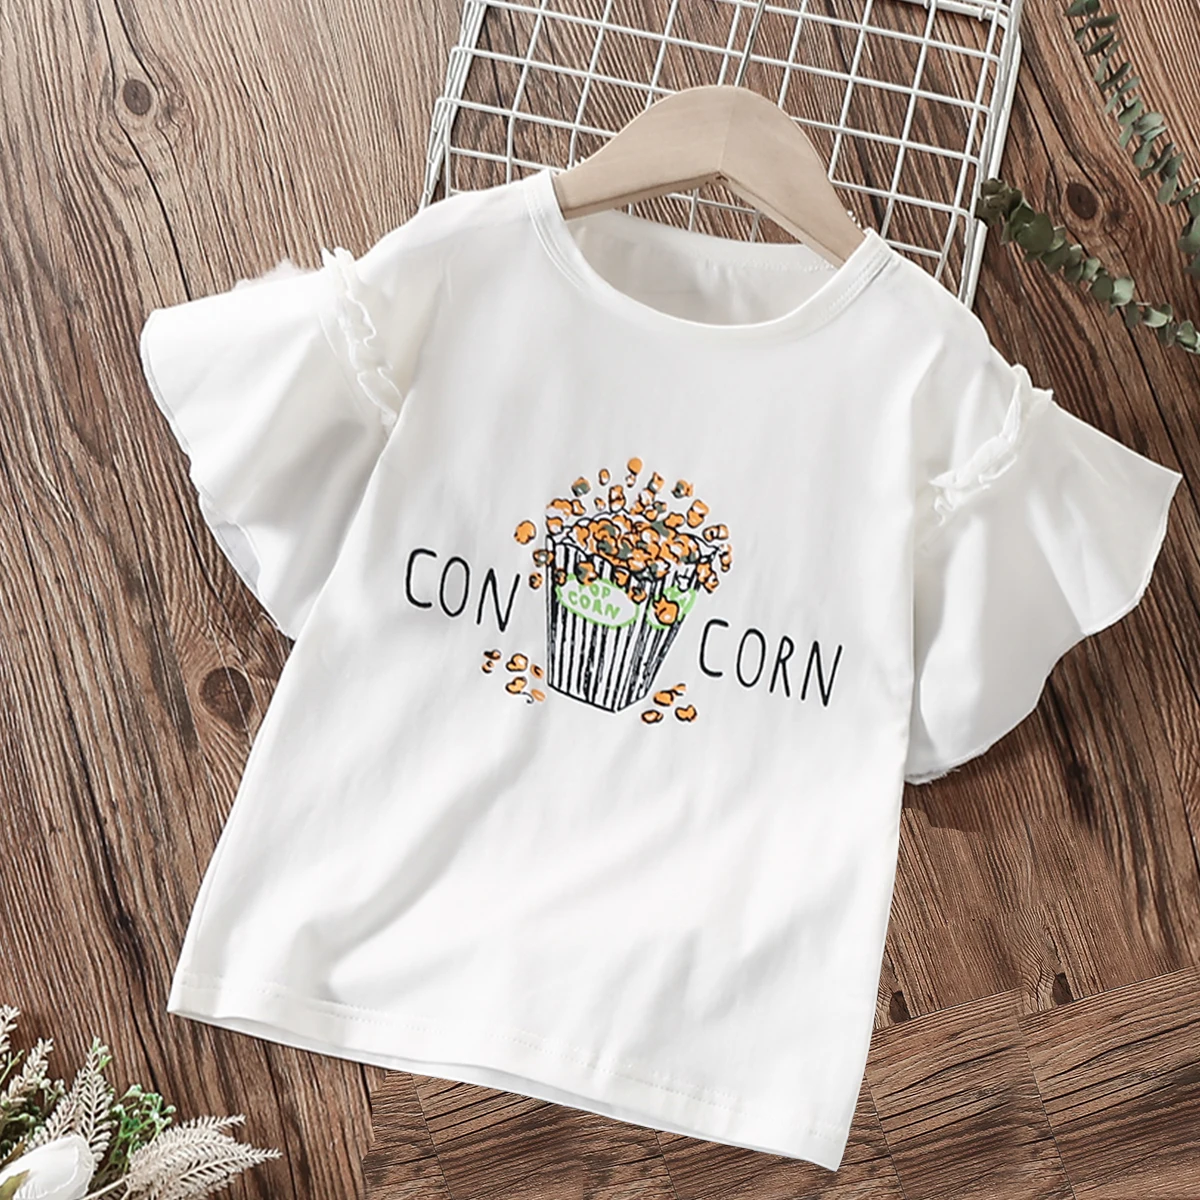 

Baby Kids Summer T-shirt for Girls Clothes Short Sleeve Cotton Shirts Wear Teenagers Tops Children Costumes 4 6 8 10 11 12 Years